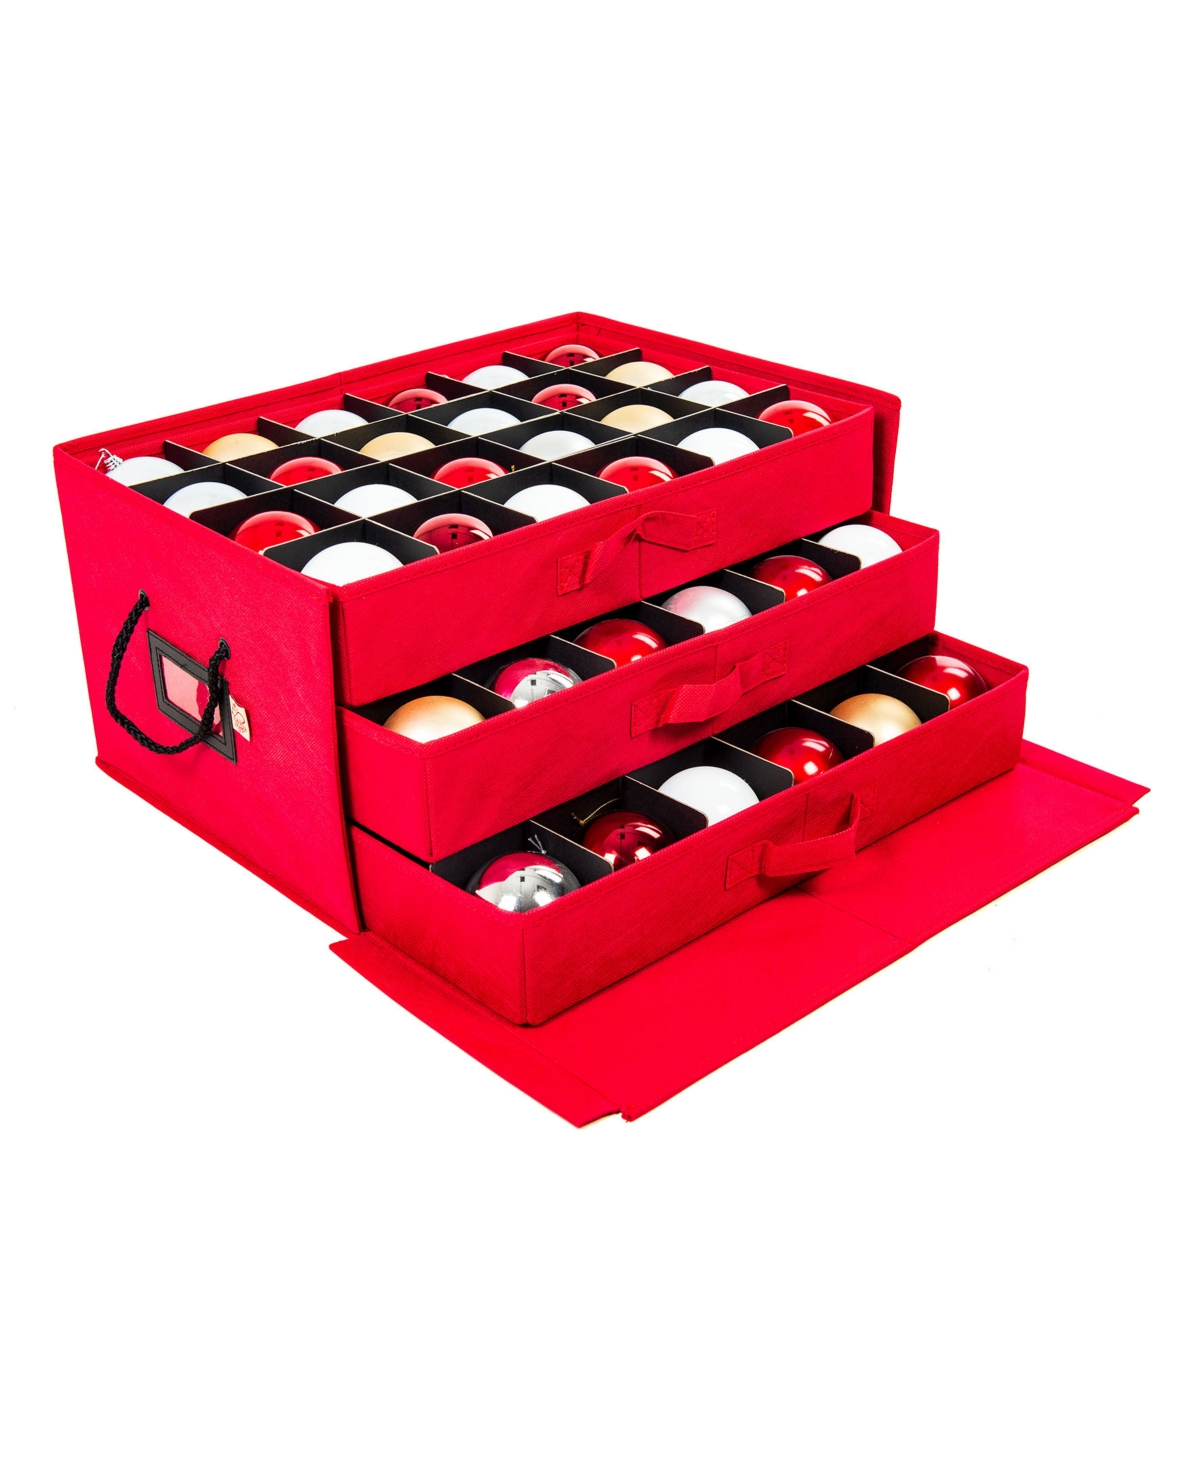 Christmas Ornament Storage Box with Drawers - Red